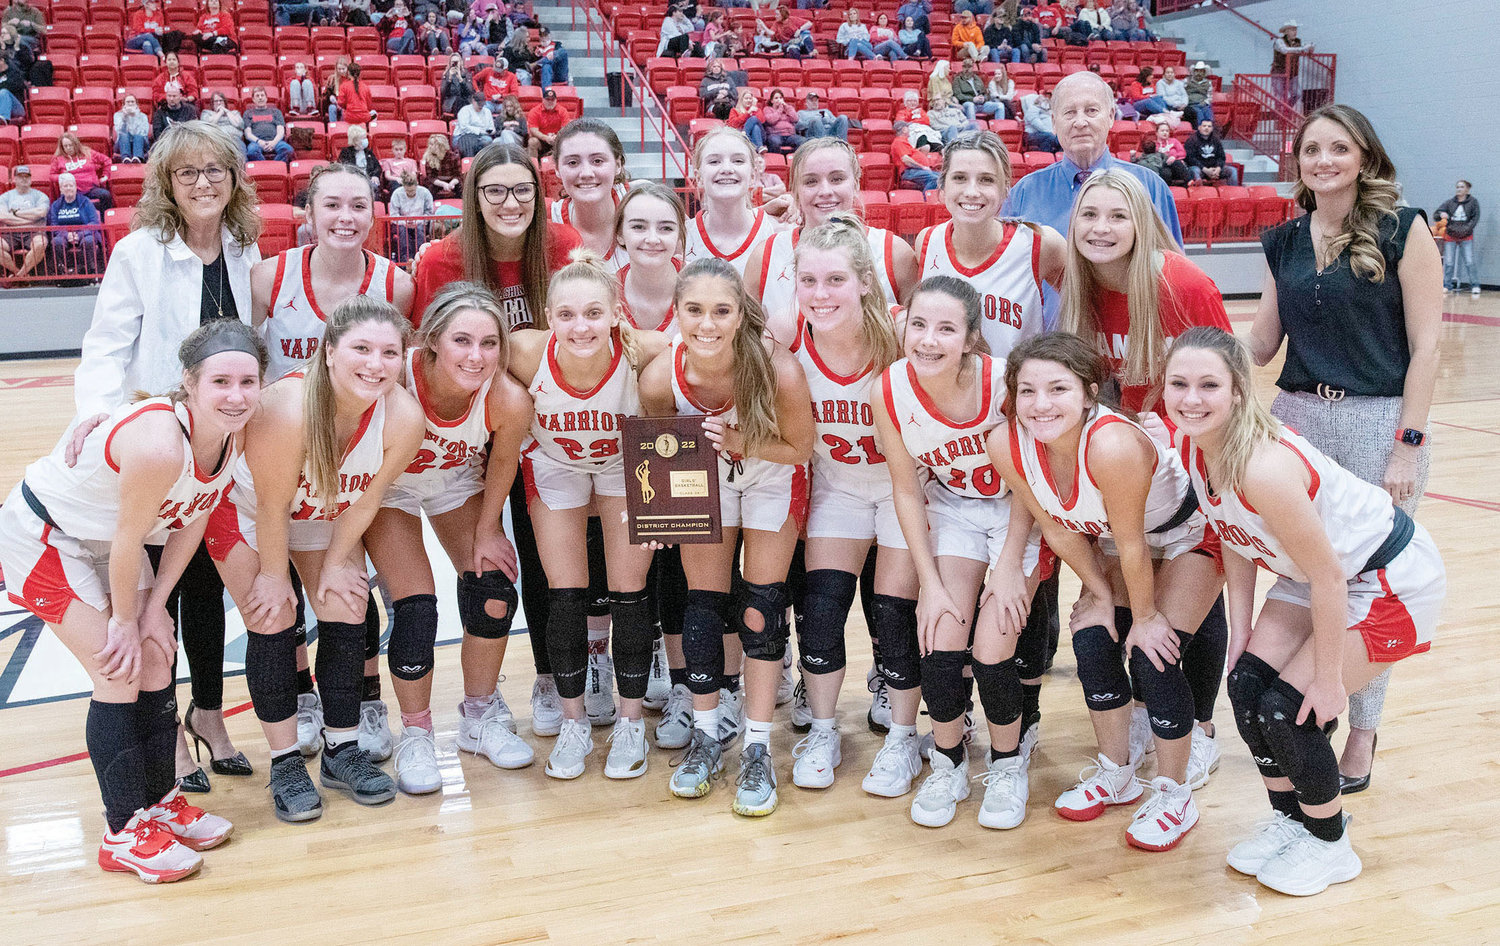 The Washington Warriors defeated Chisholm 46-34 Saturday to claim the District tournament. Washington plays Perry in the Regional tournament.